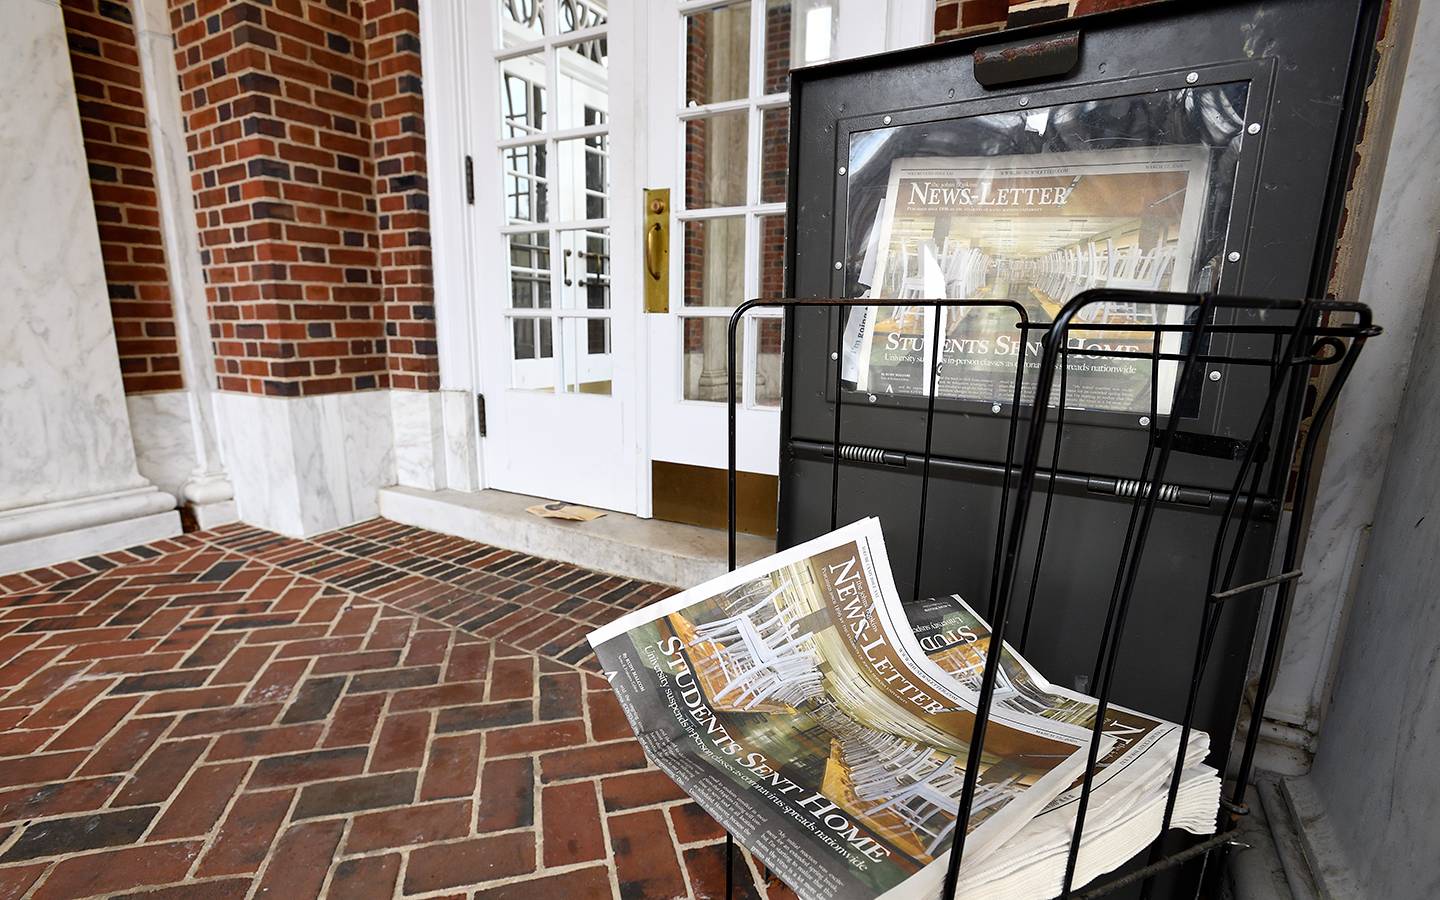 A newspaper stand holds the last issues of the News-Letter for the spring semester